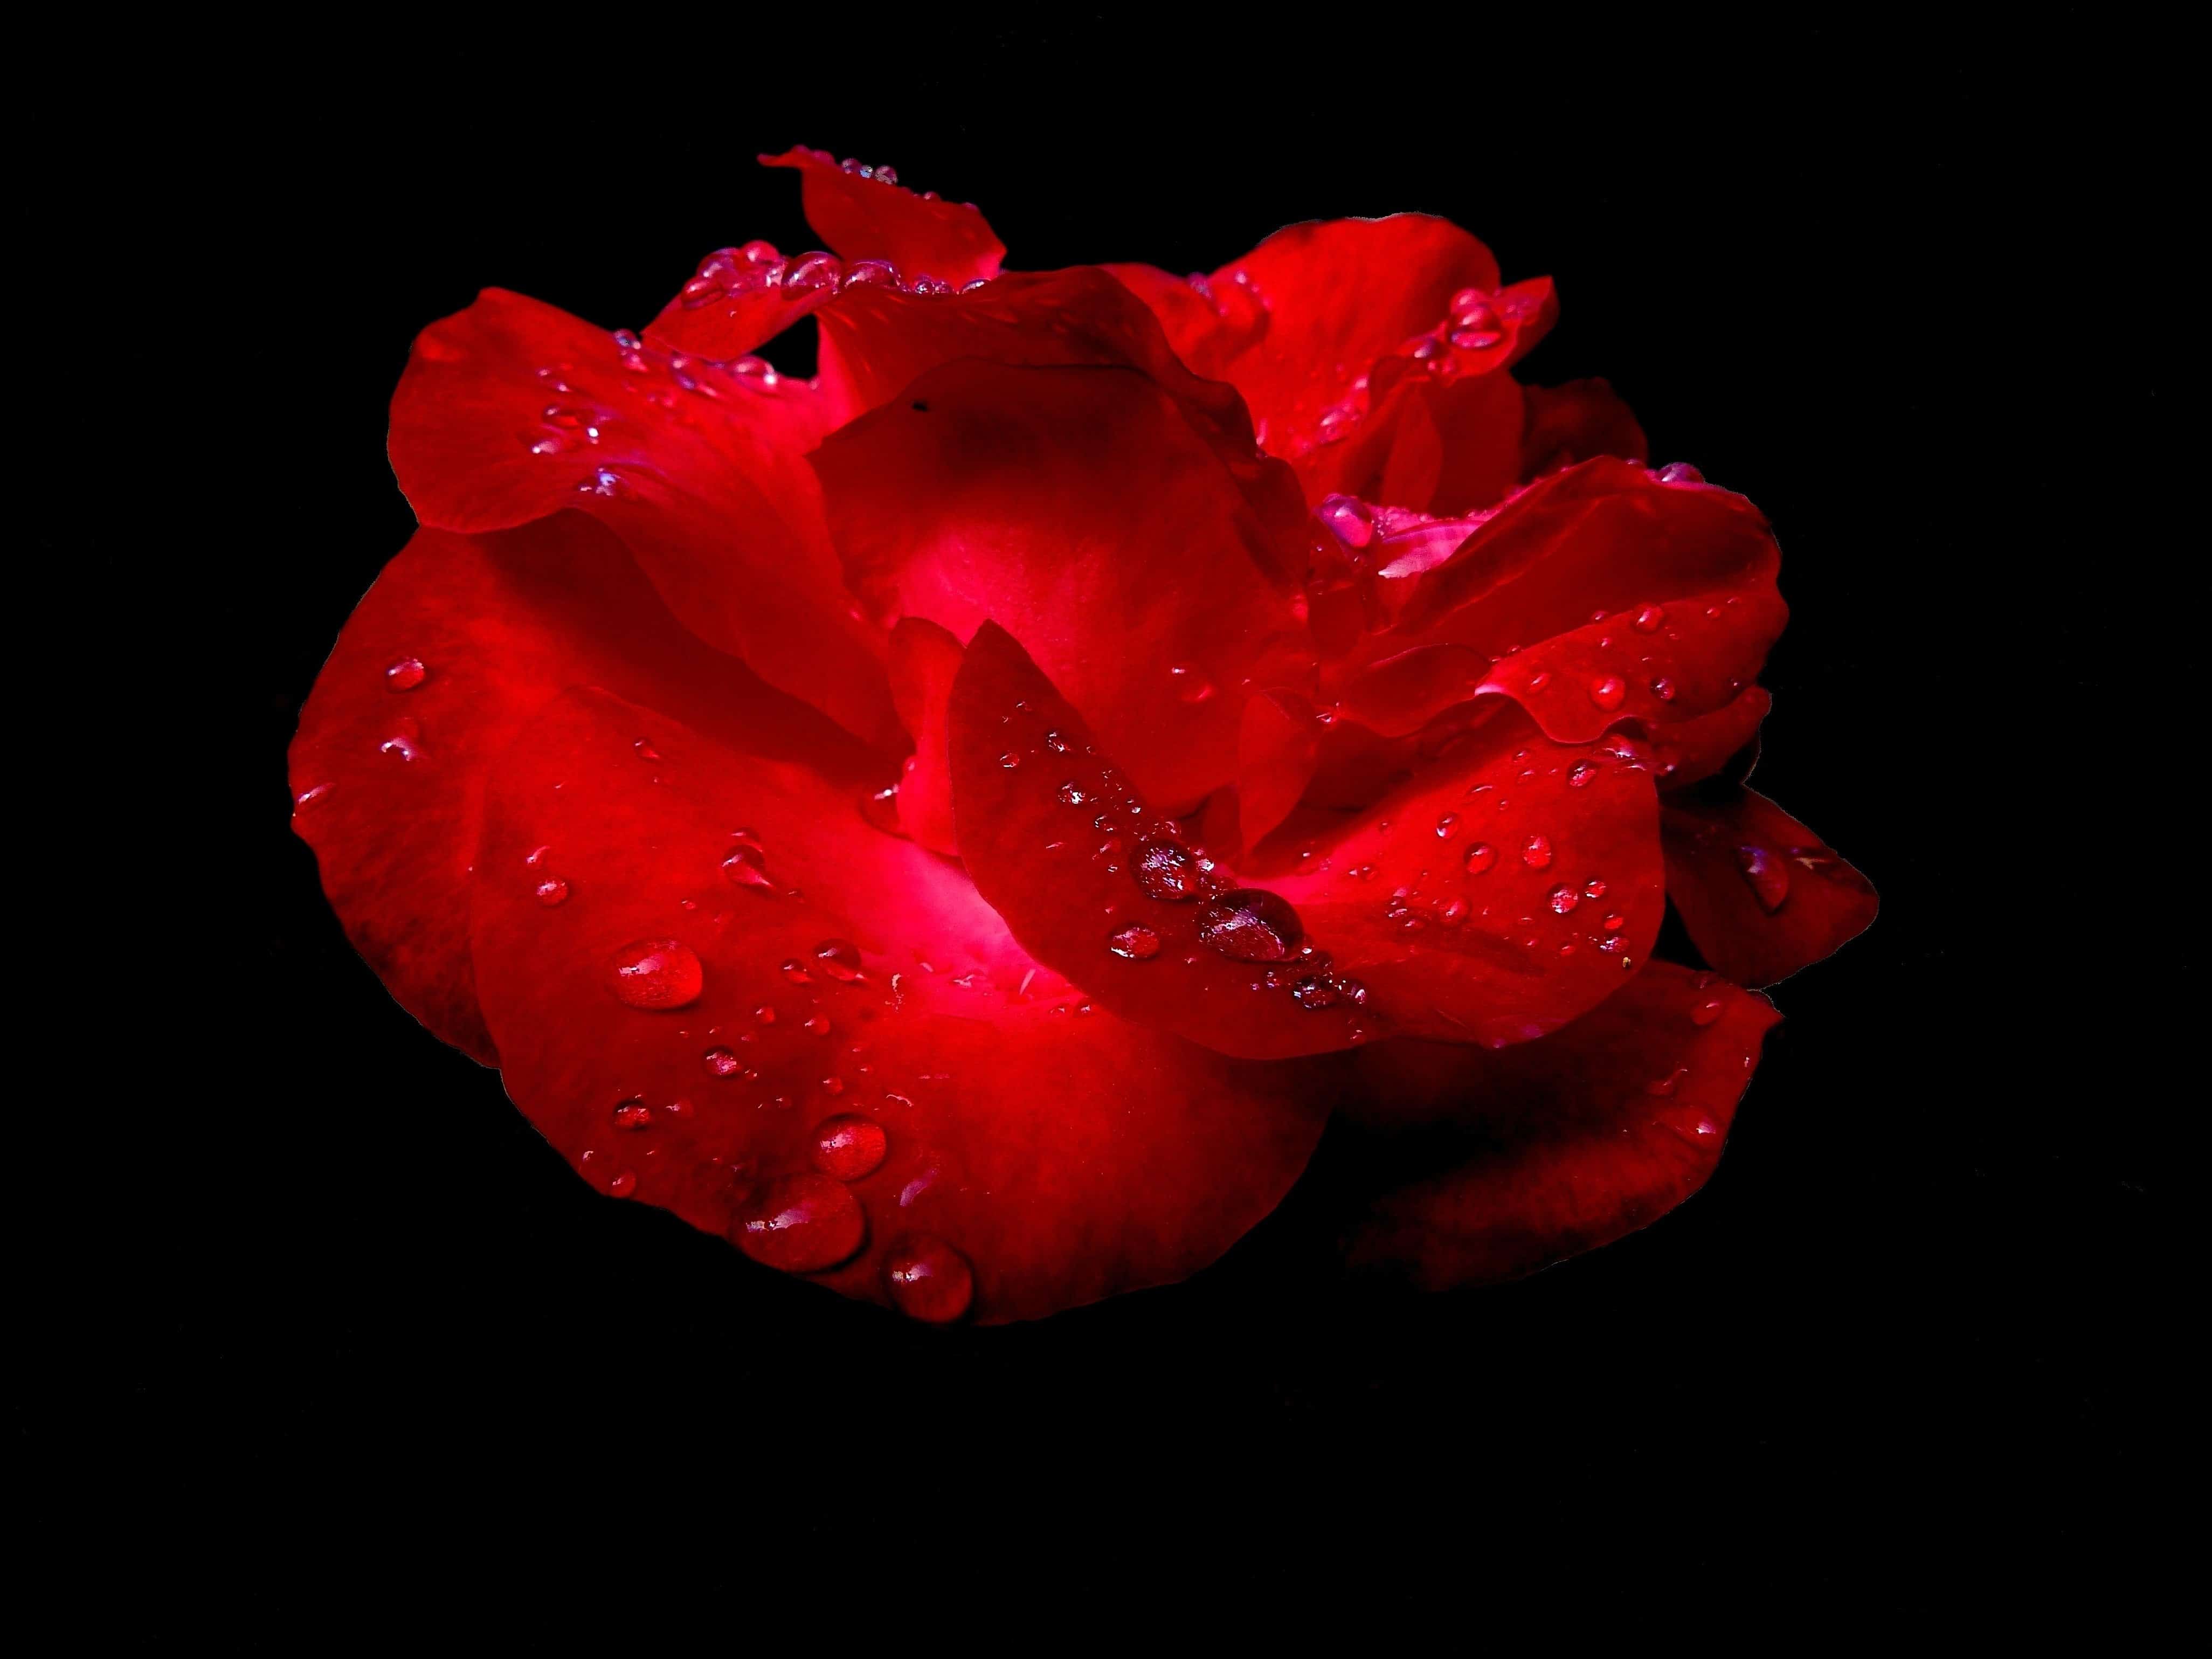 Free picture: dark, shadow, rose, red flower, petal, plant, pink ...